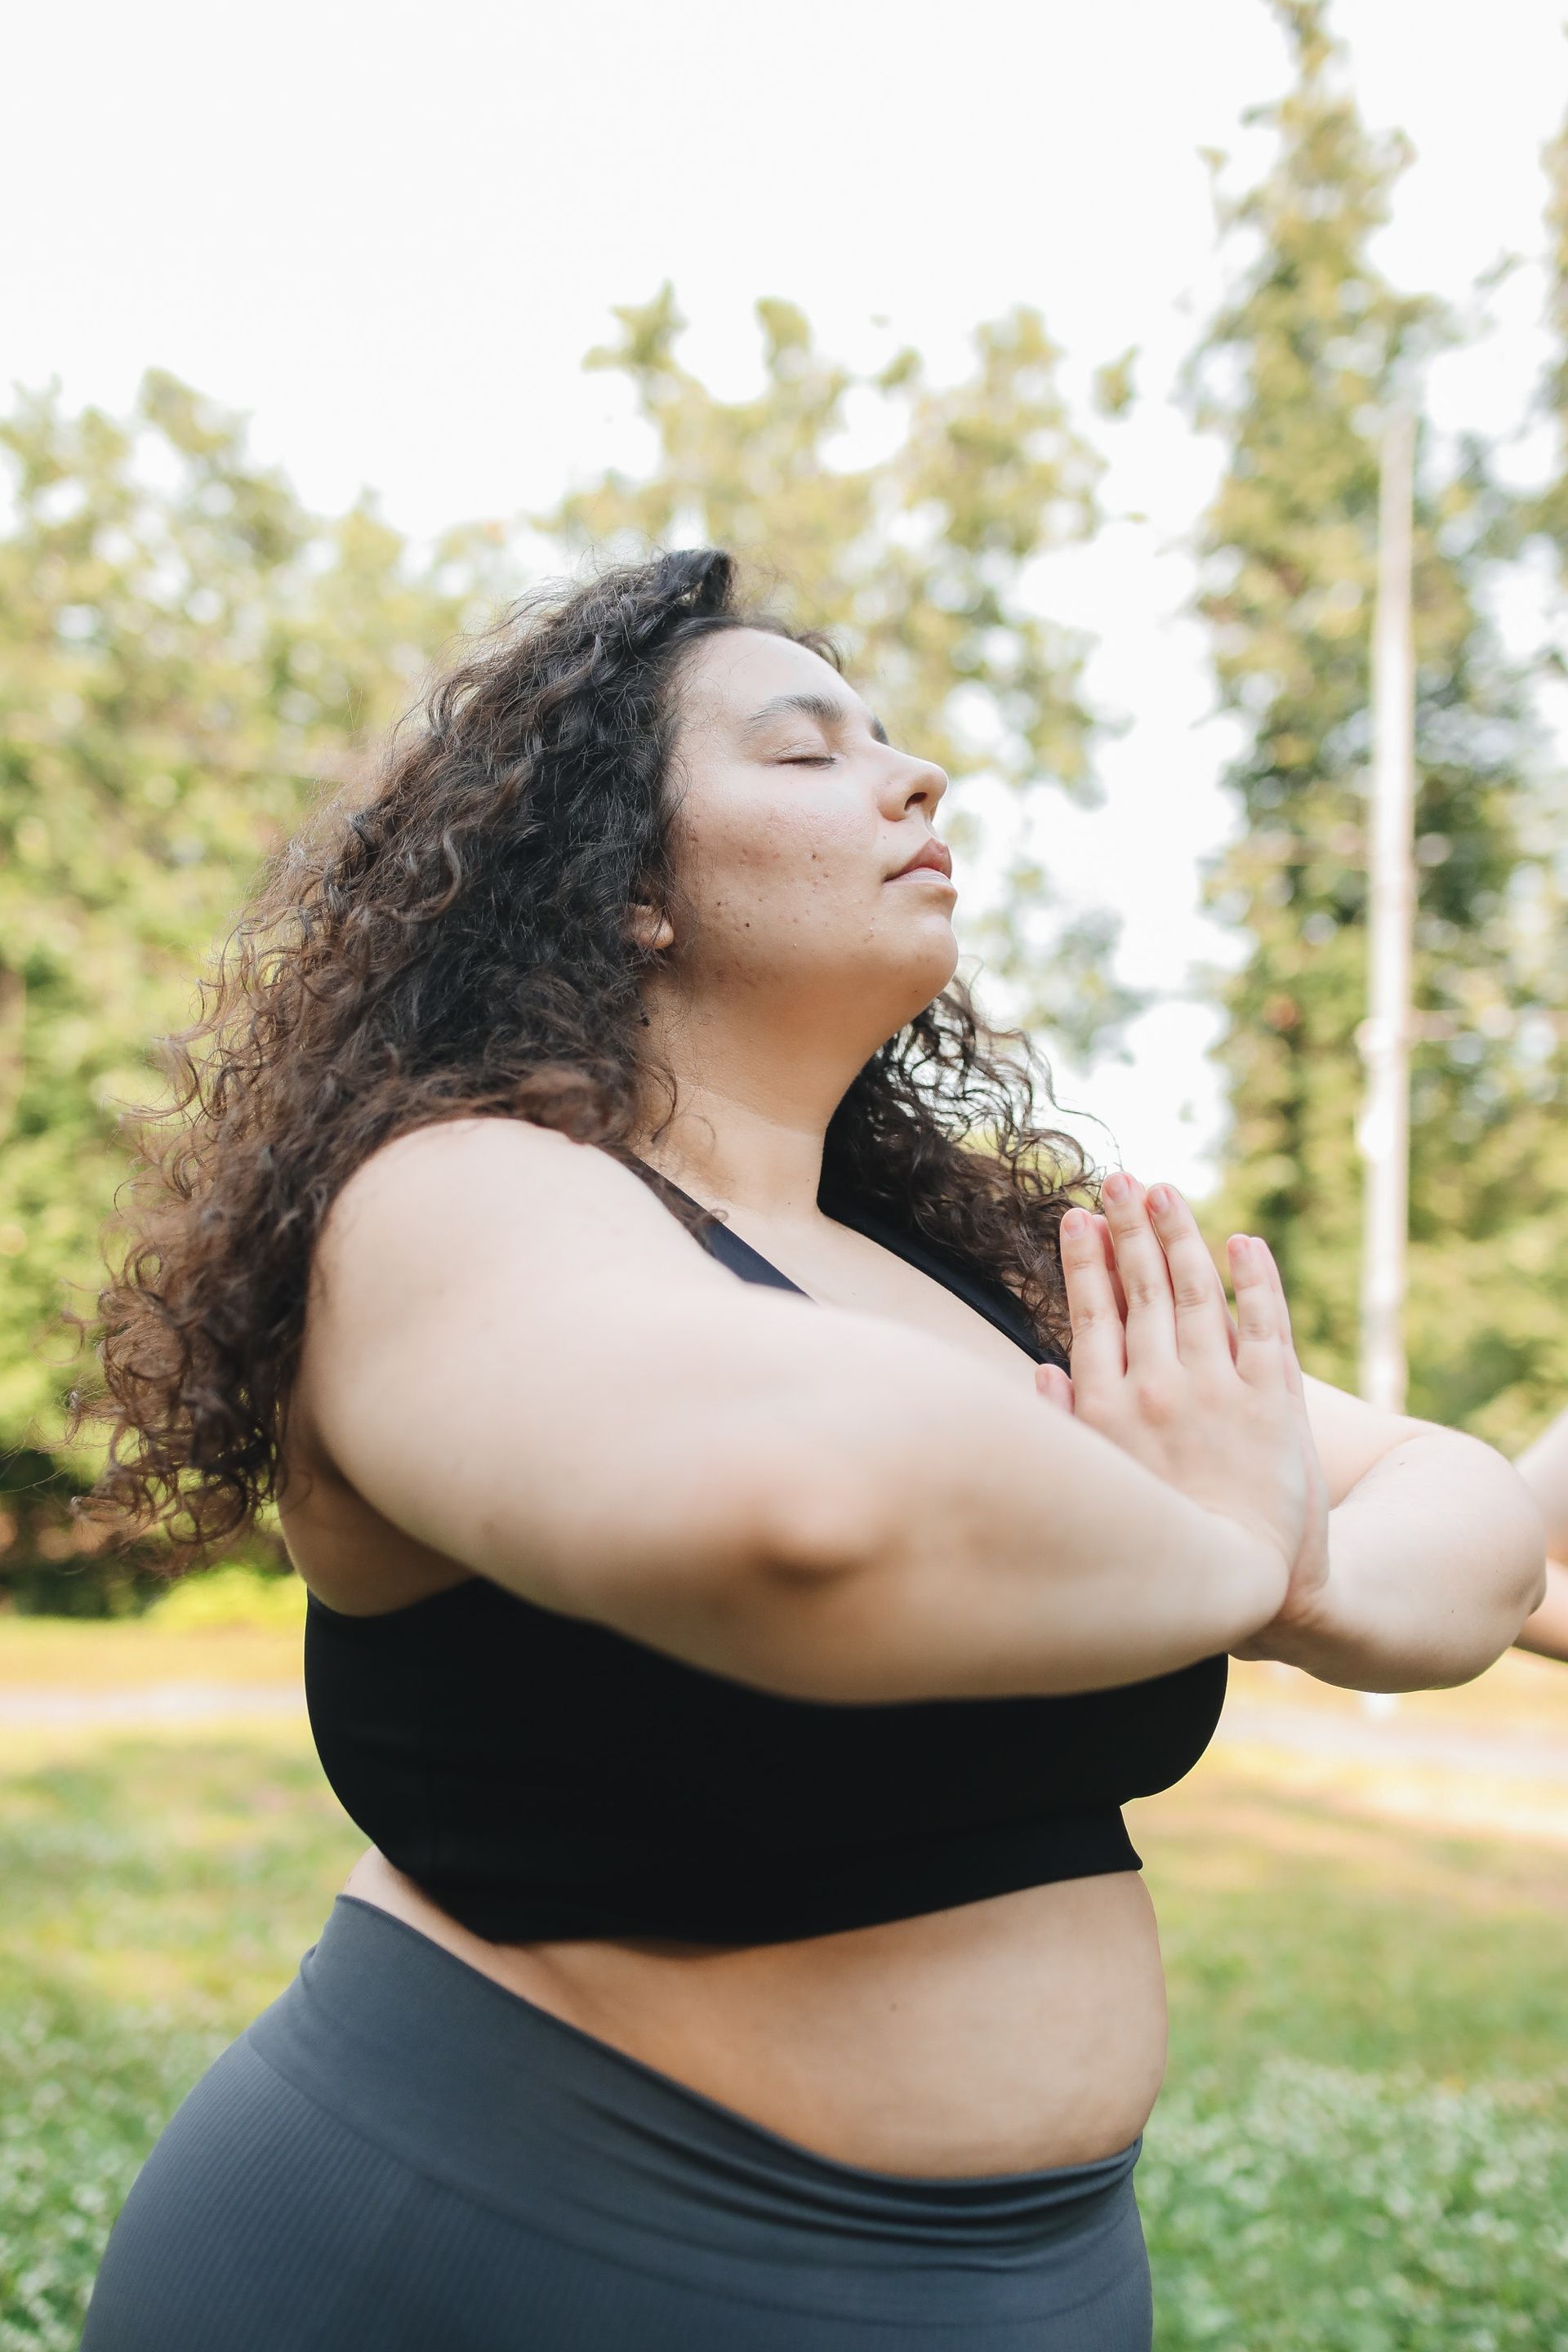 Woman with curly hair practices yoga for divorce.